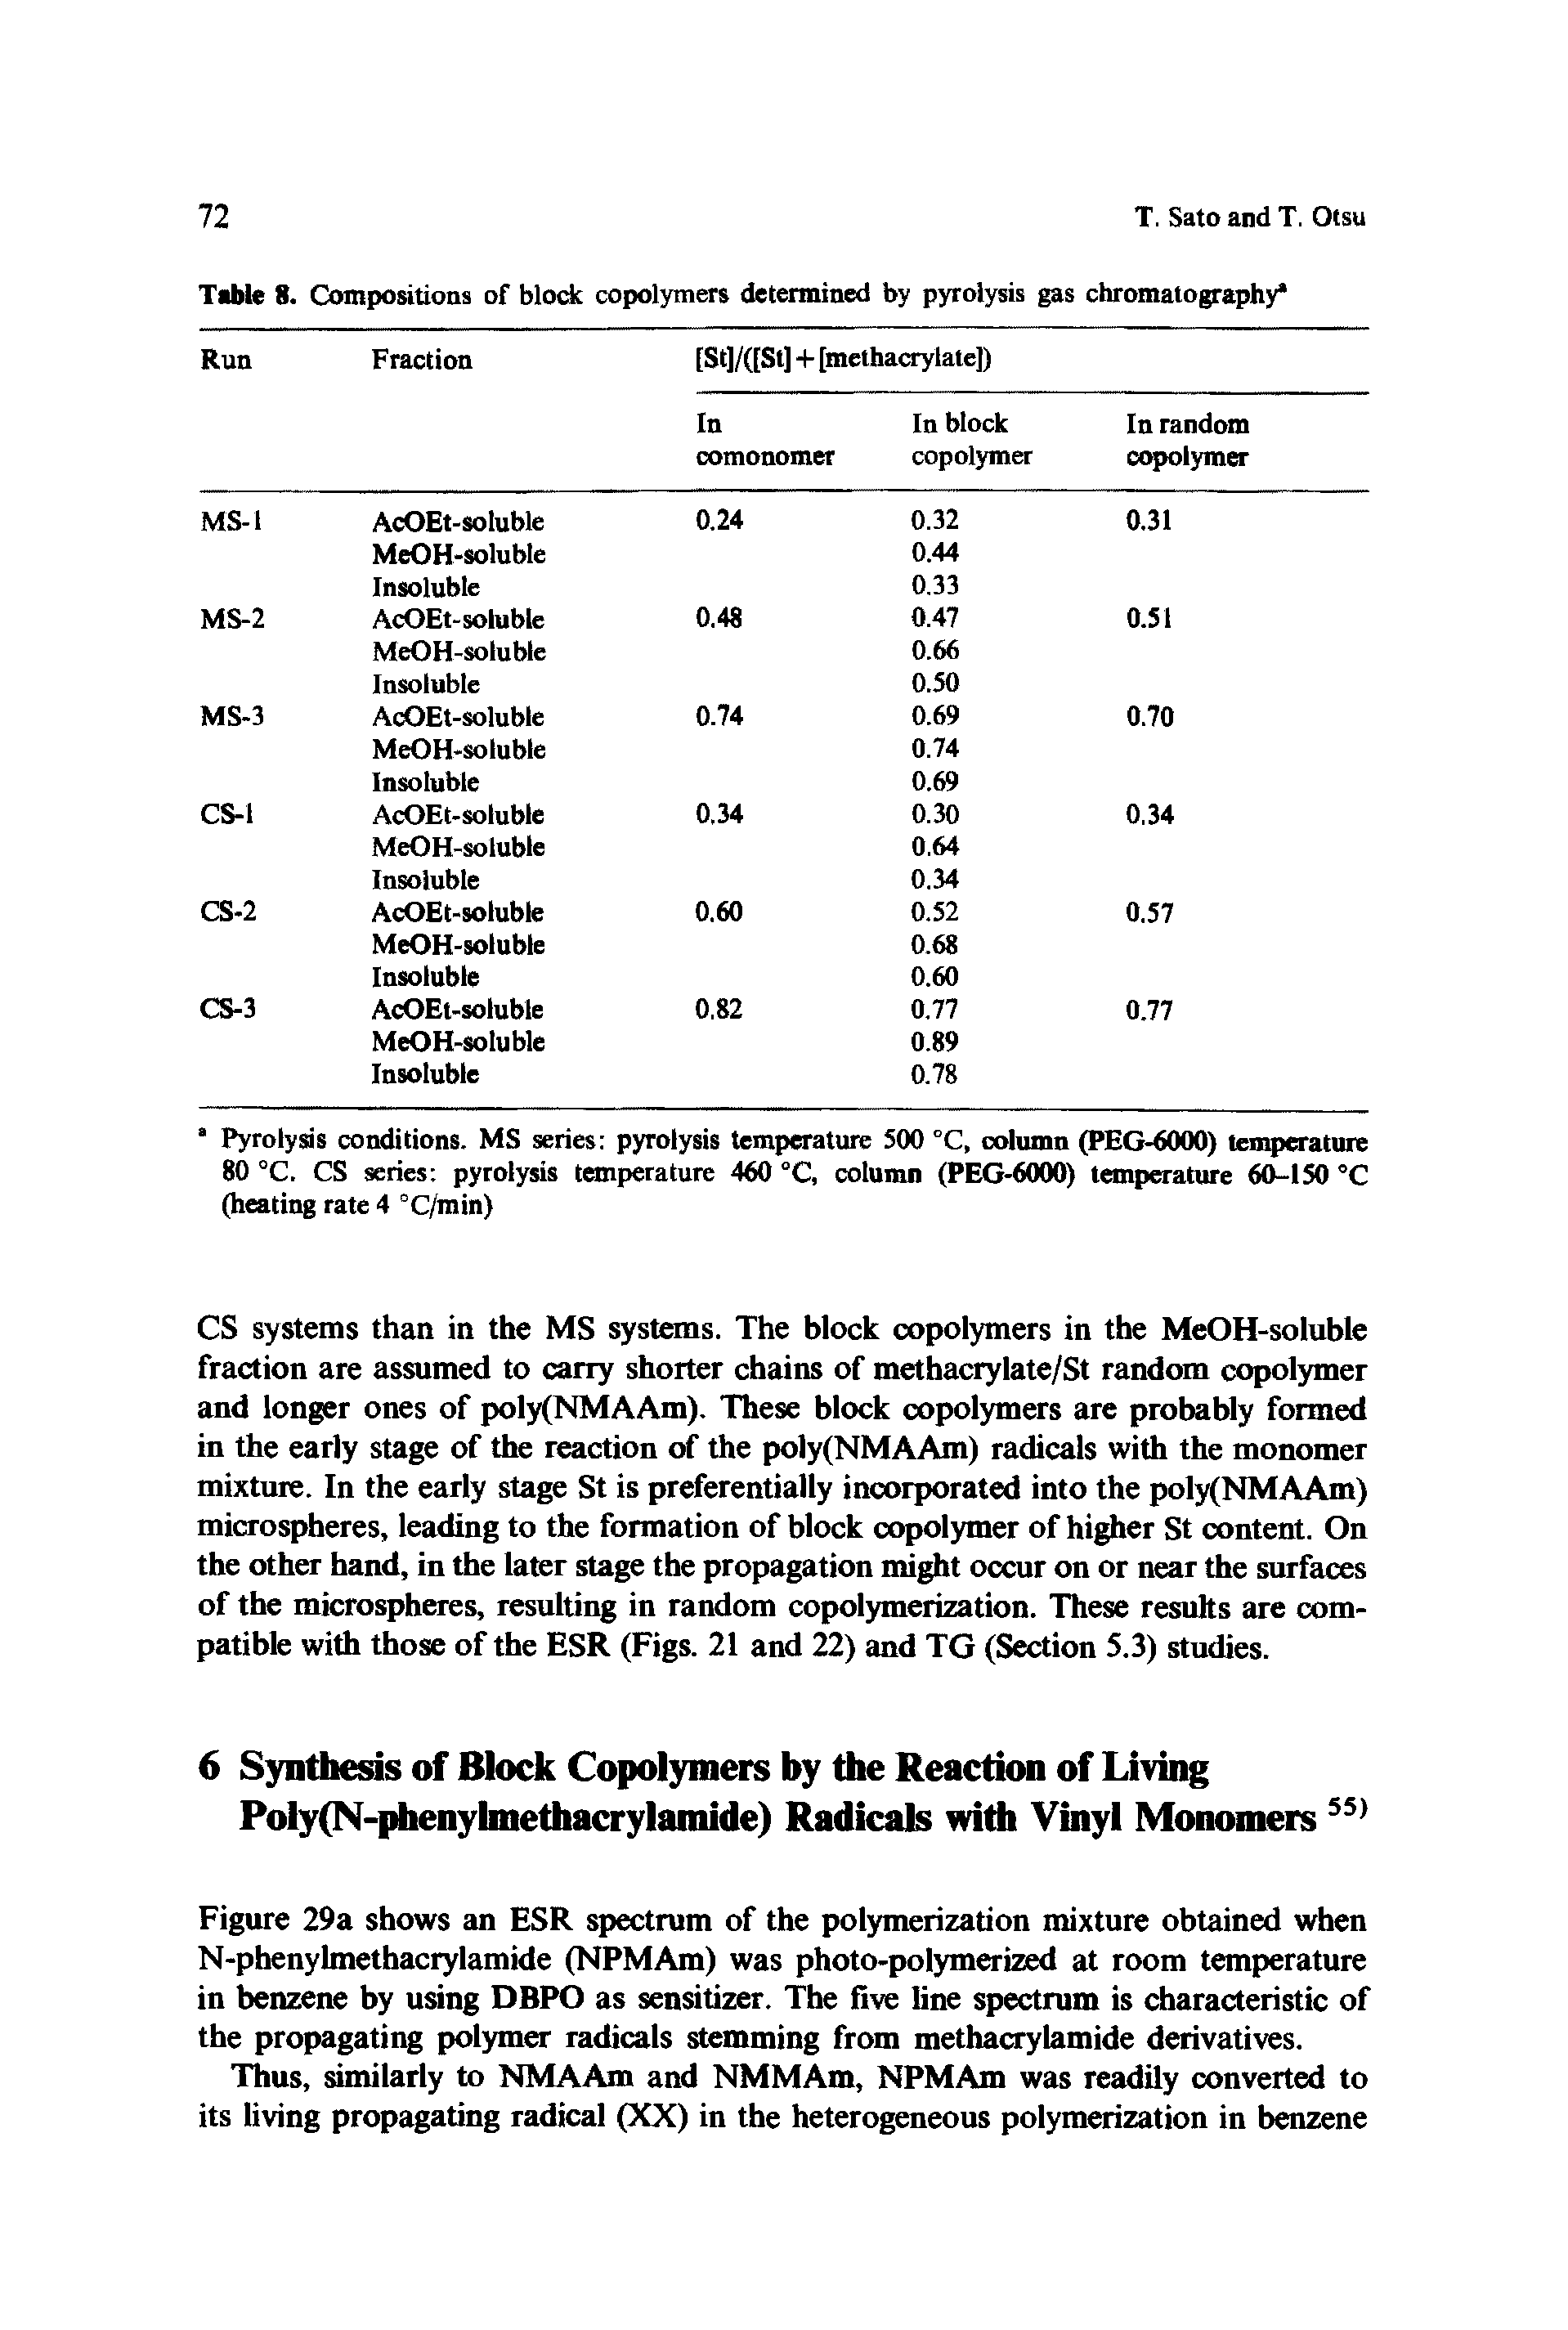 Table 8. Compositions of block copolymers determined by pyrol gas chromatography ...